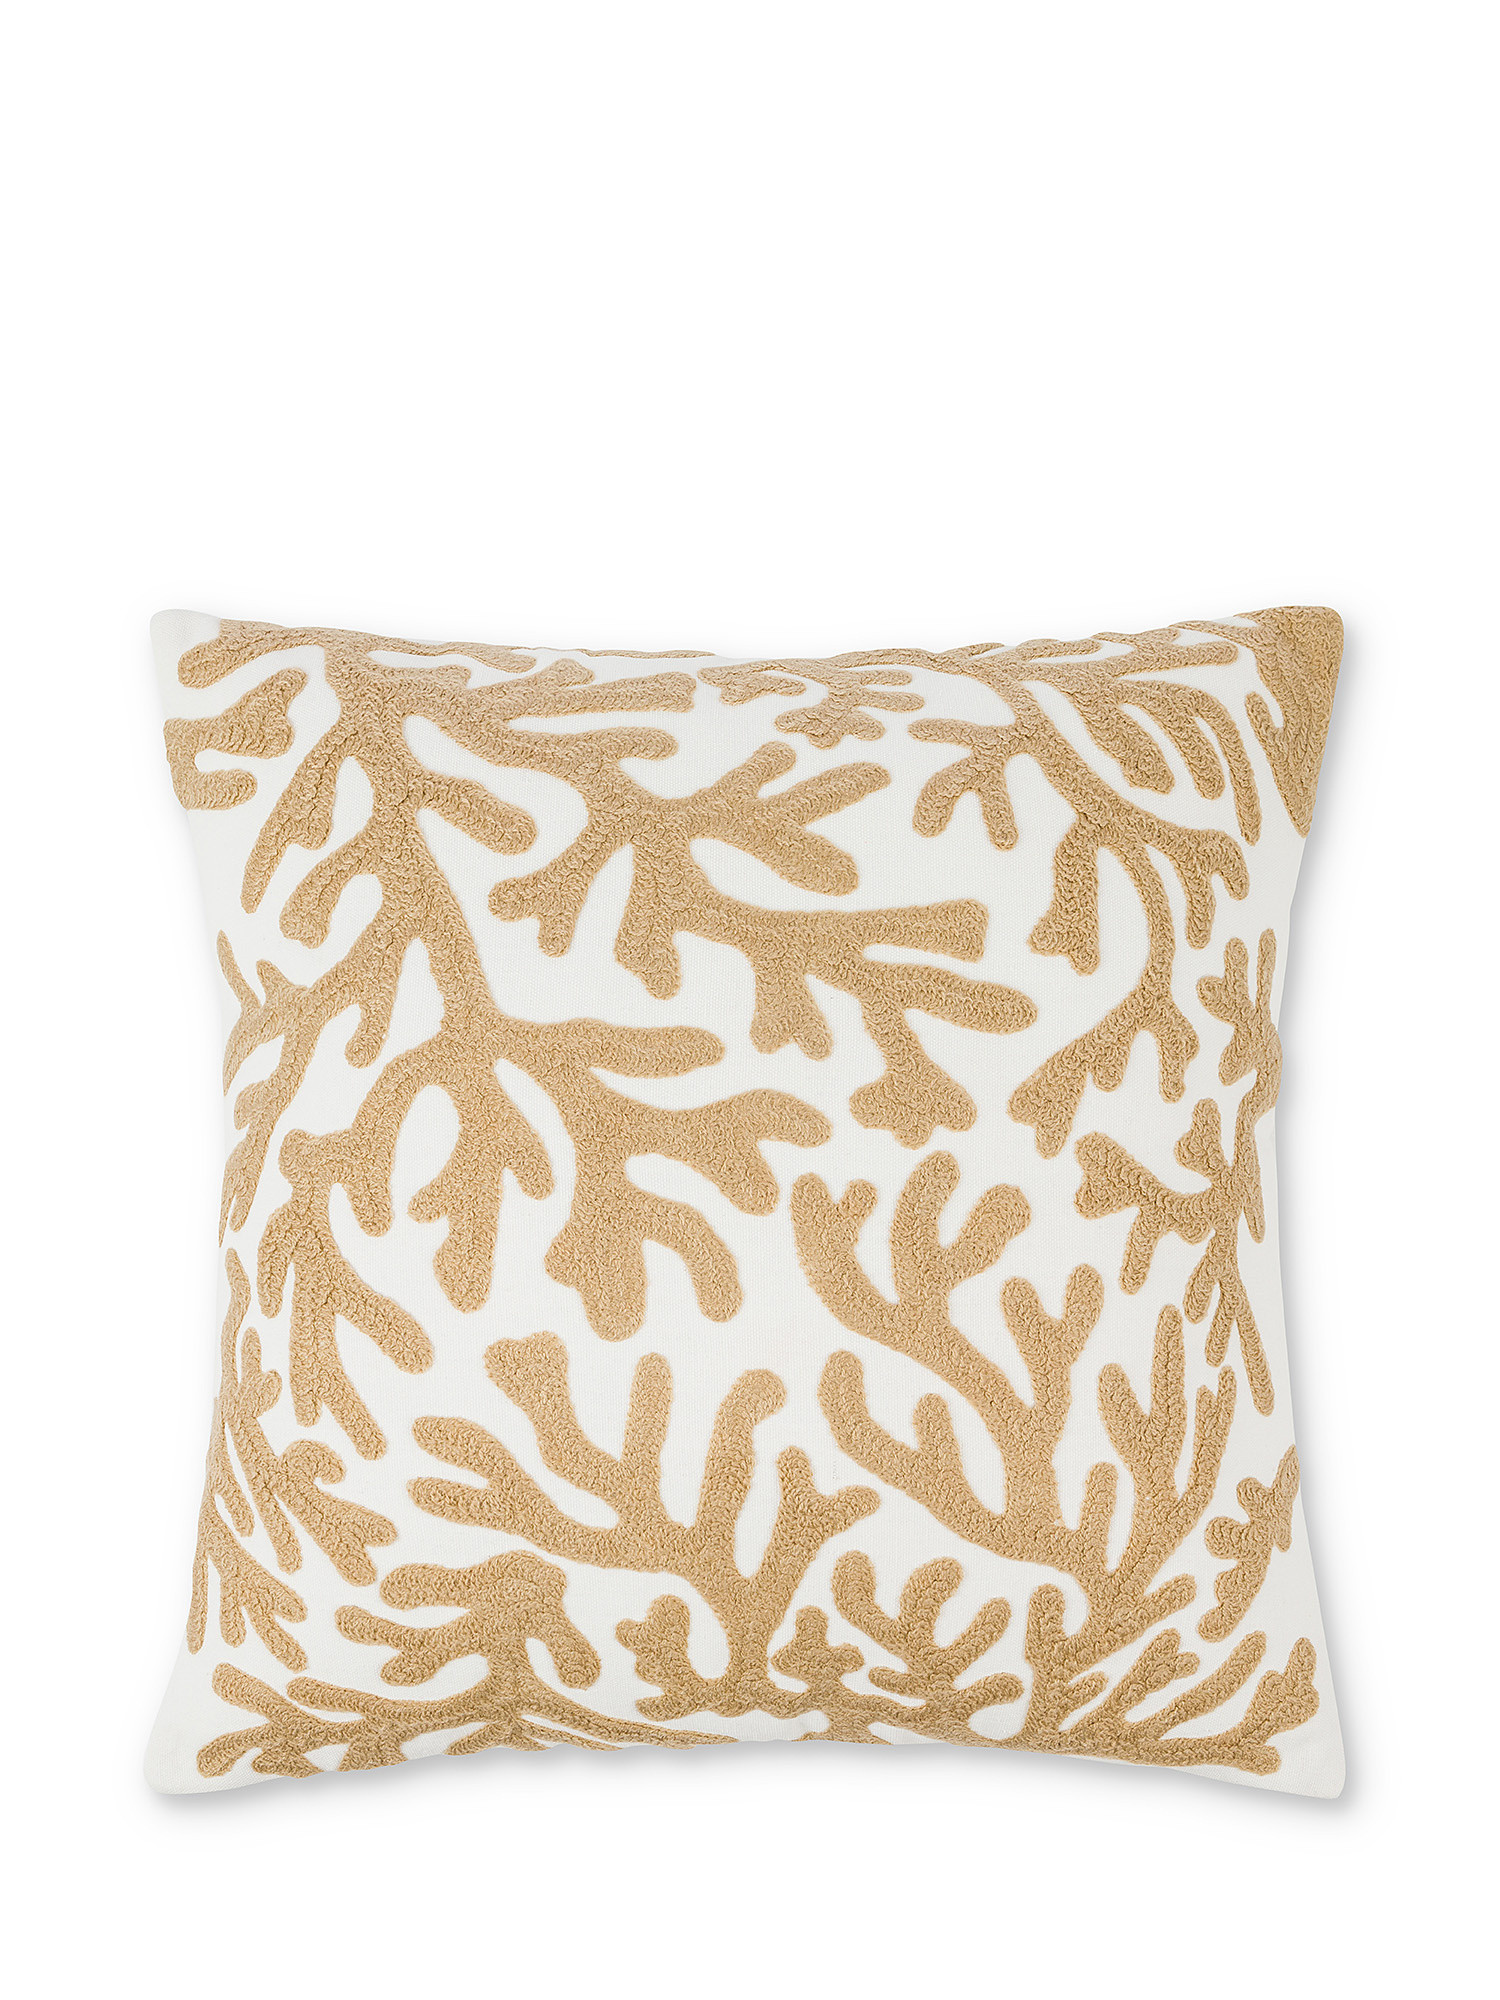 Cotton cushion with coral embroidery 45x45cm, Beige, large image number 0